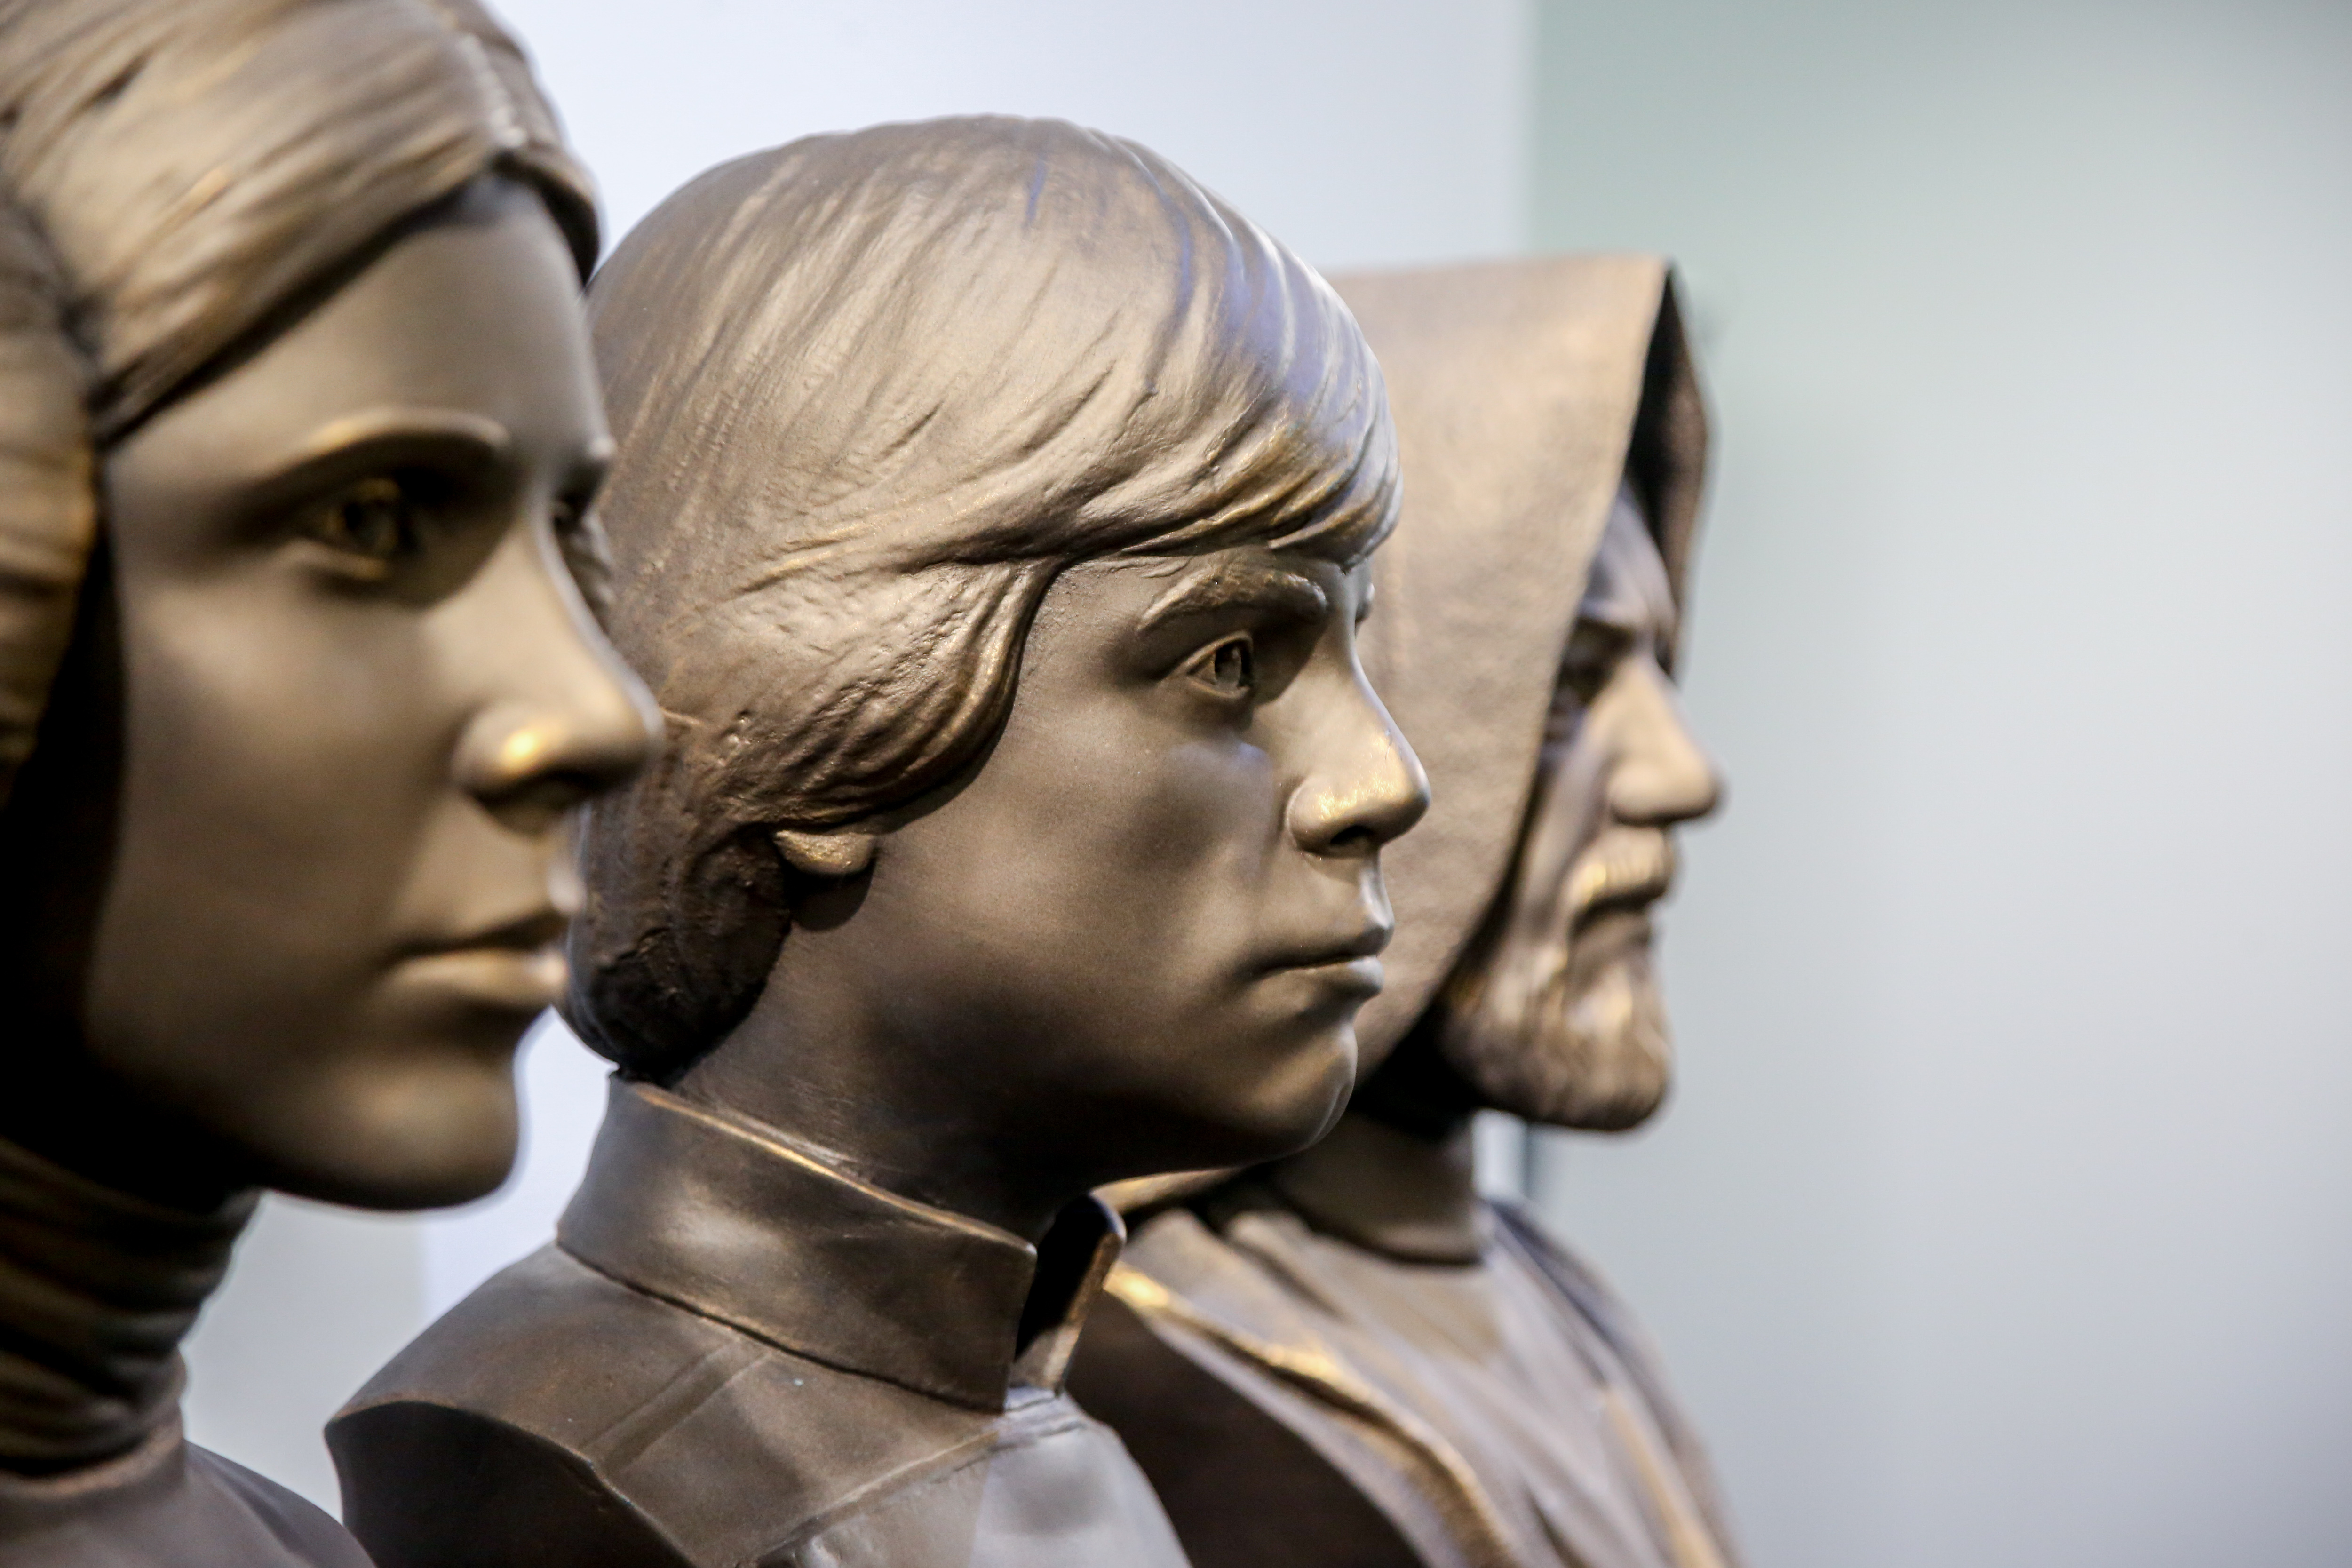 Busts, life-size and 3D printed, of Leia, Luke Skywalker, and Obi Wan Kenobi, from the ‘Star Wars’ universe, exhibited at the Auditorium and exhibition hall Paco de Lucia, in the district of Latina, April 3, 2022, in Madrid, Spain. This exhibition showcases the work of the Valladolid-born author Juan Villa, creator of sculptures and television props for such well-known programs as ‘Cuarto Milenio’.